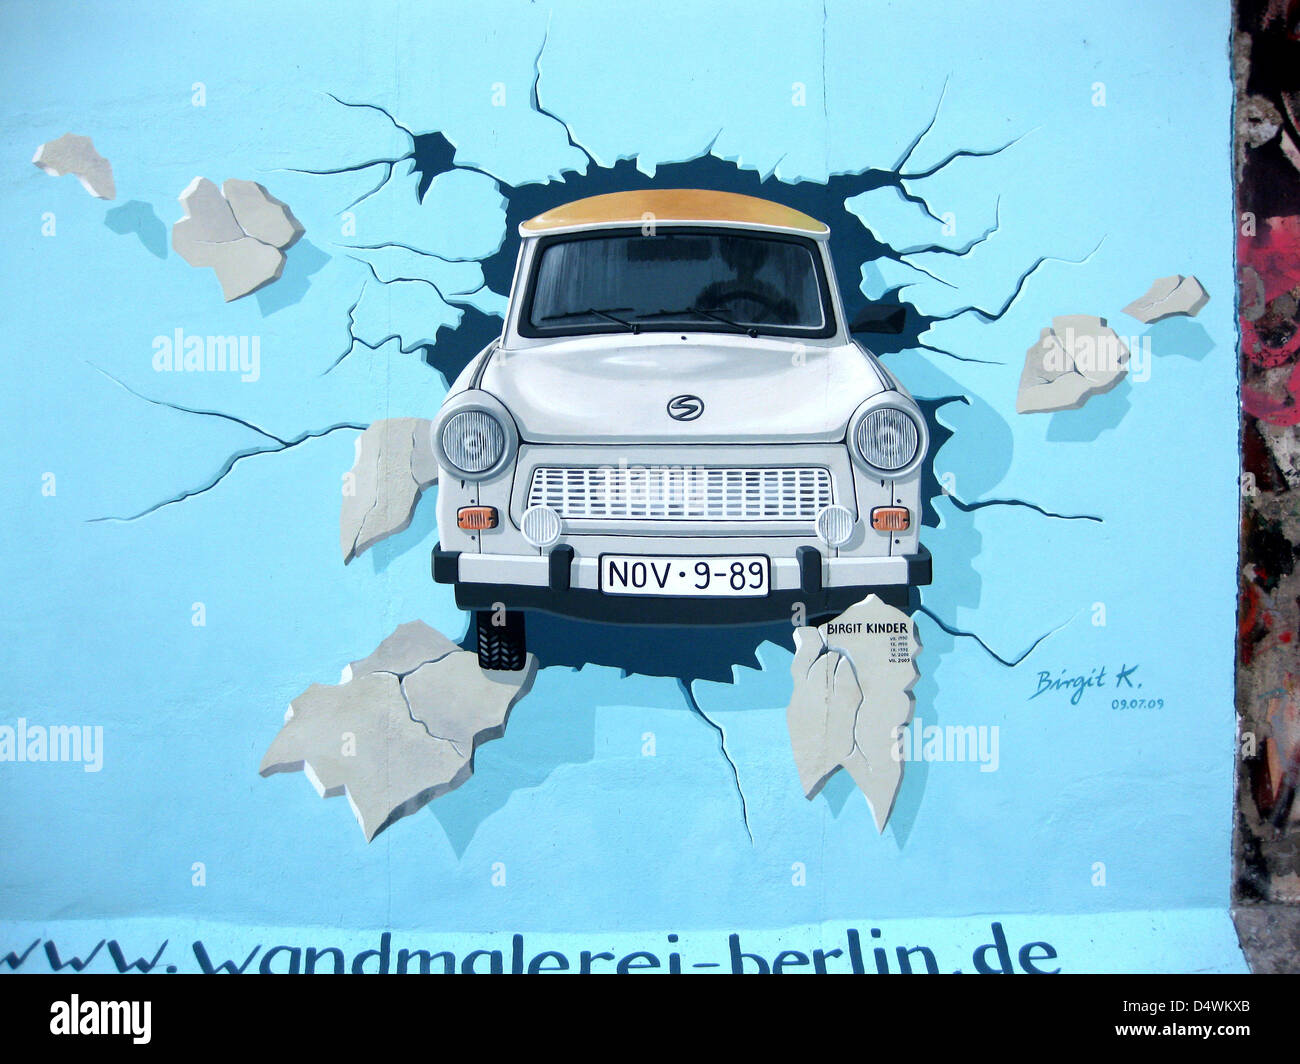 The artwork by Birgit Kinder, "Test The Rest", is pictured on a section of the Berlin Wall at the East Side Gallery on Mühlenstrasse in Berlin, Germany, in August 2009. The concrete parts of the Berlin Wall between Ostbahnhof and Warschauer Strasse were painted by international artists after the opening of the inner-German border in November 1989. Photo: Dieter Palm Stock Photo